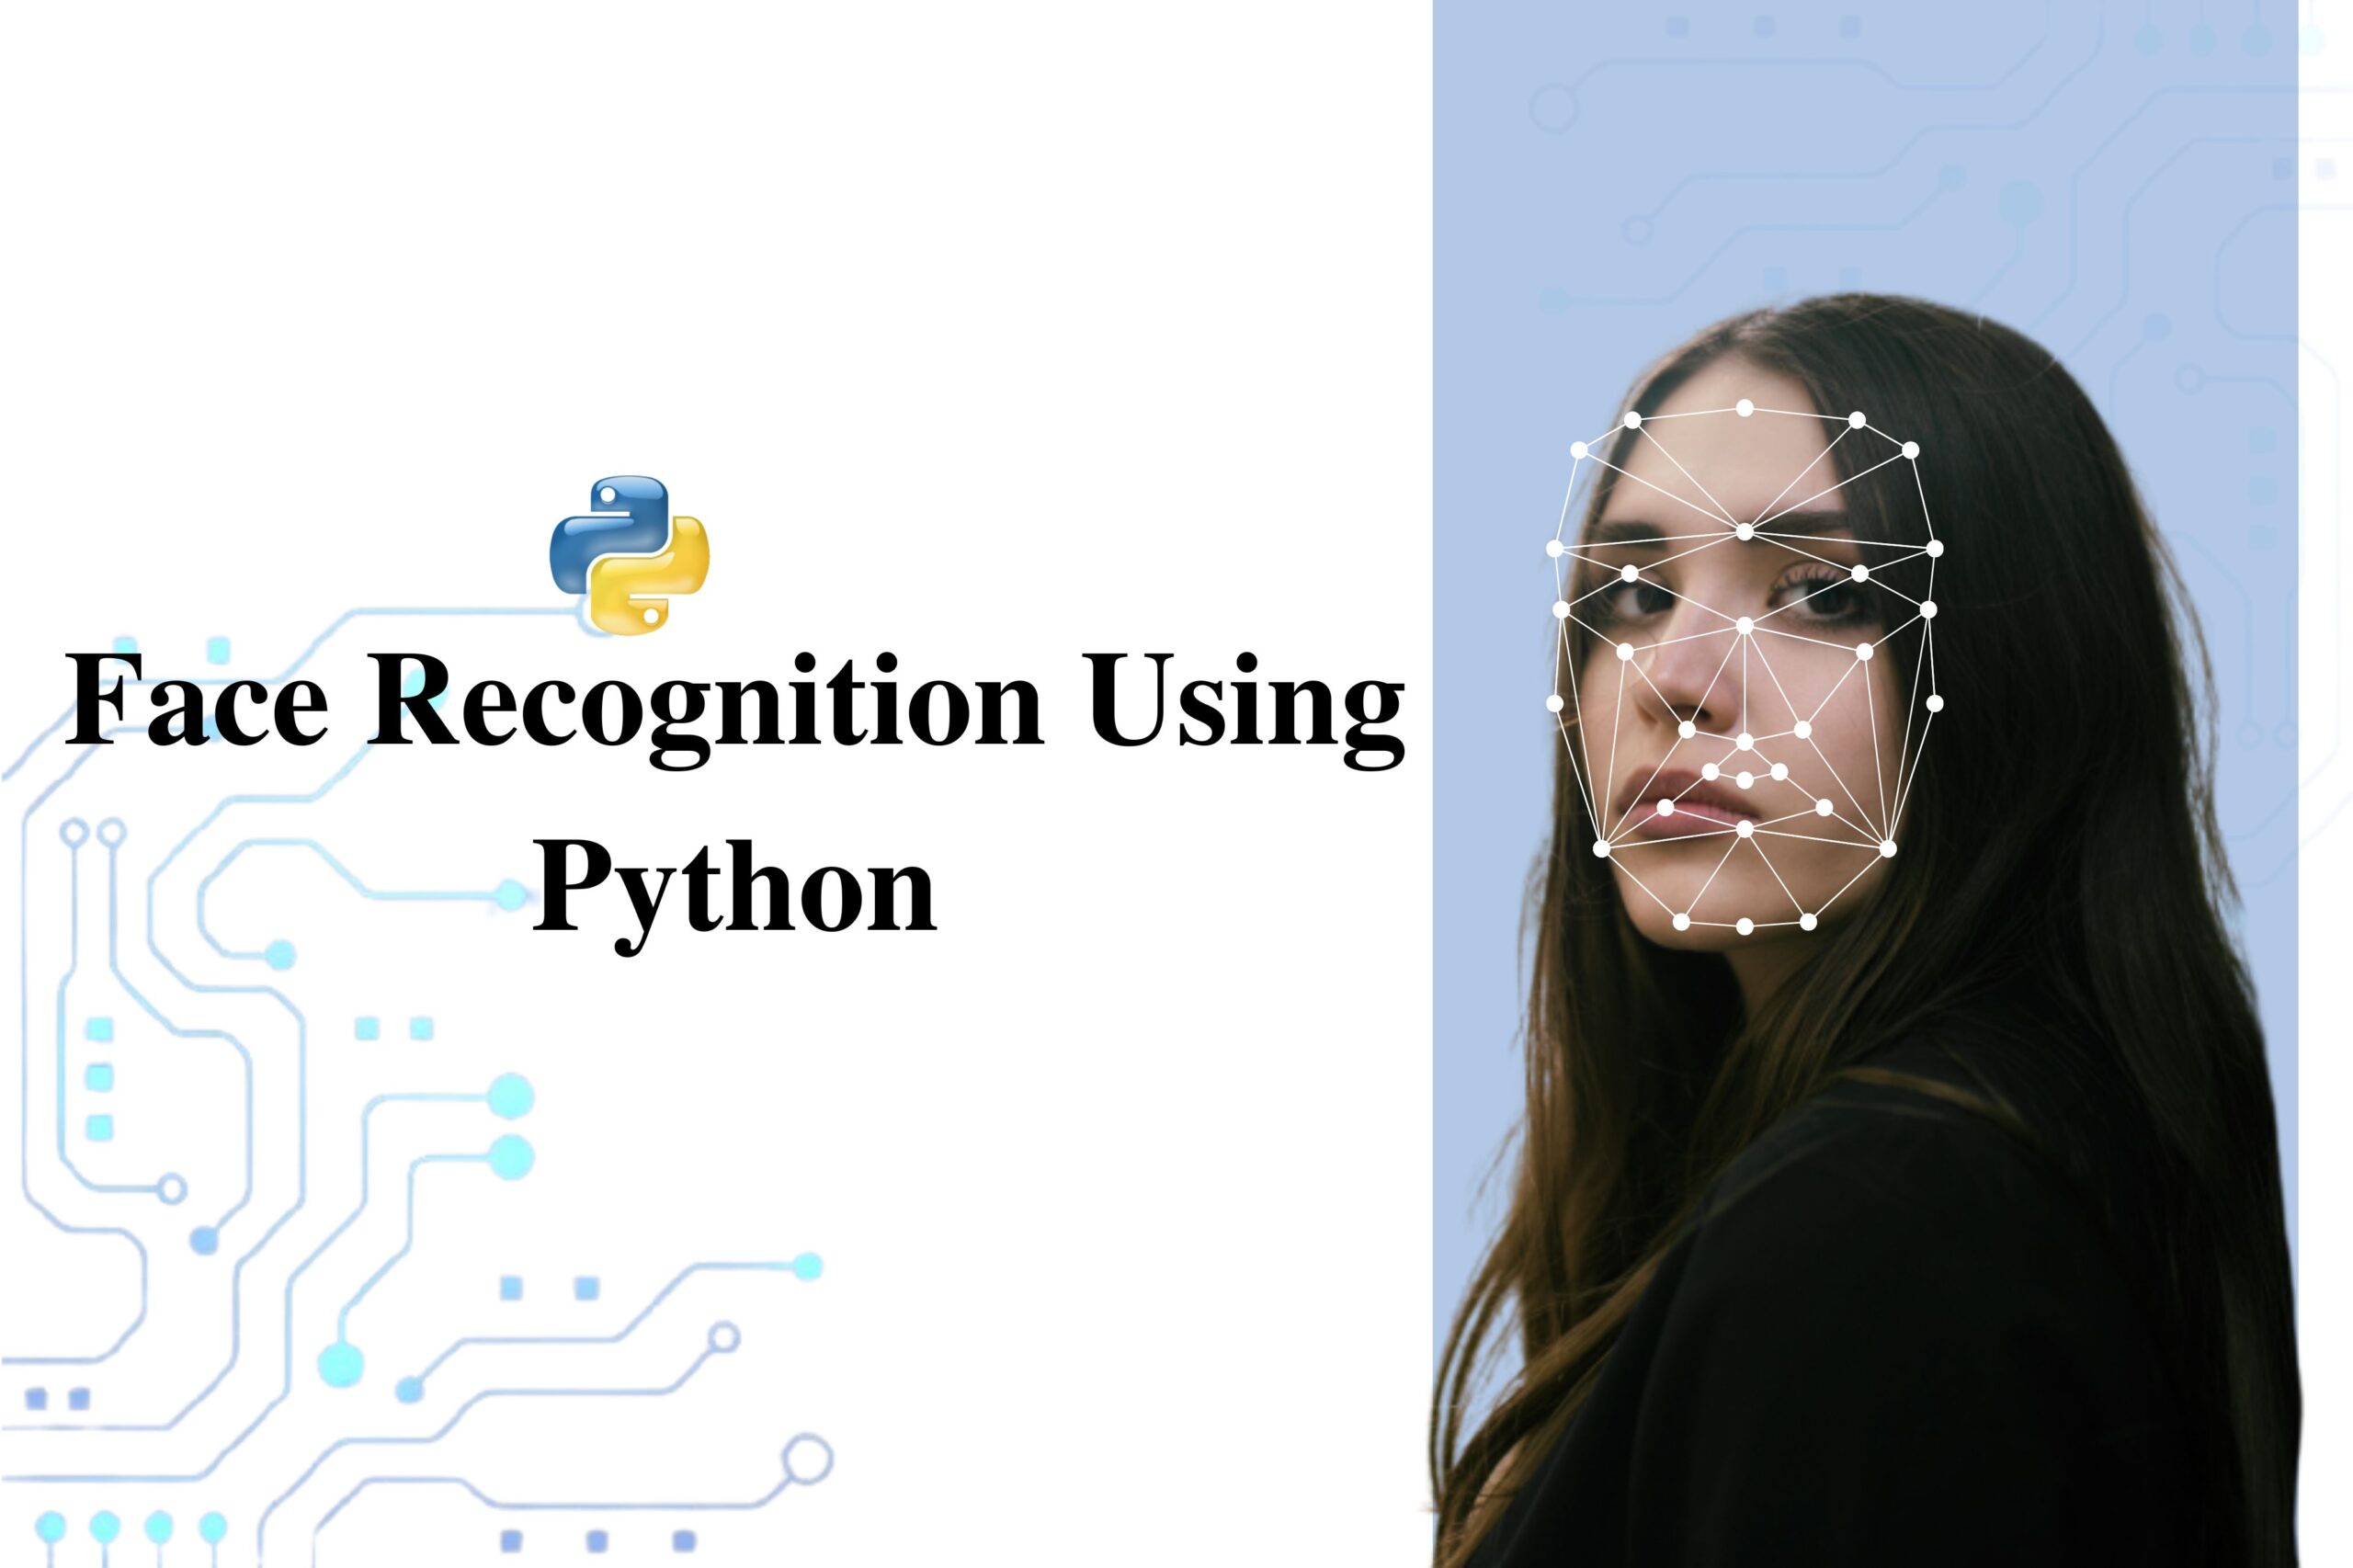 Face Recognition using python